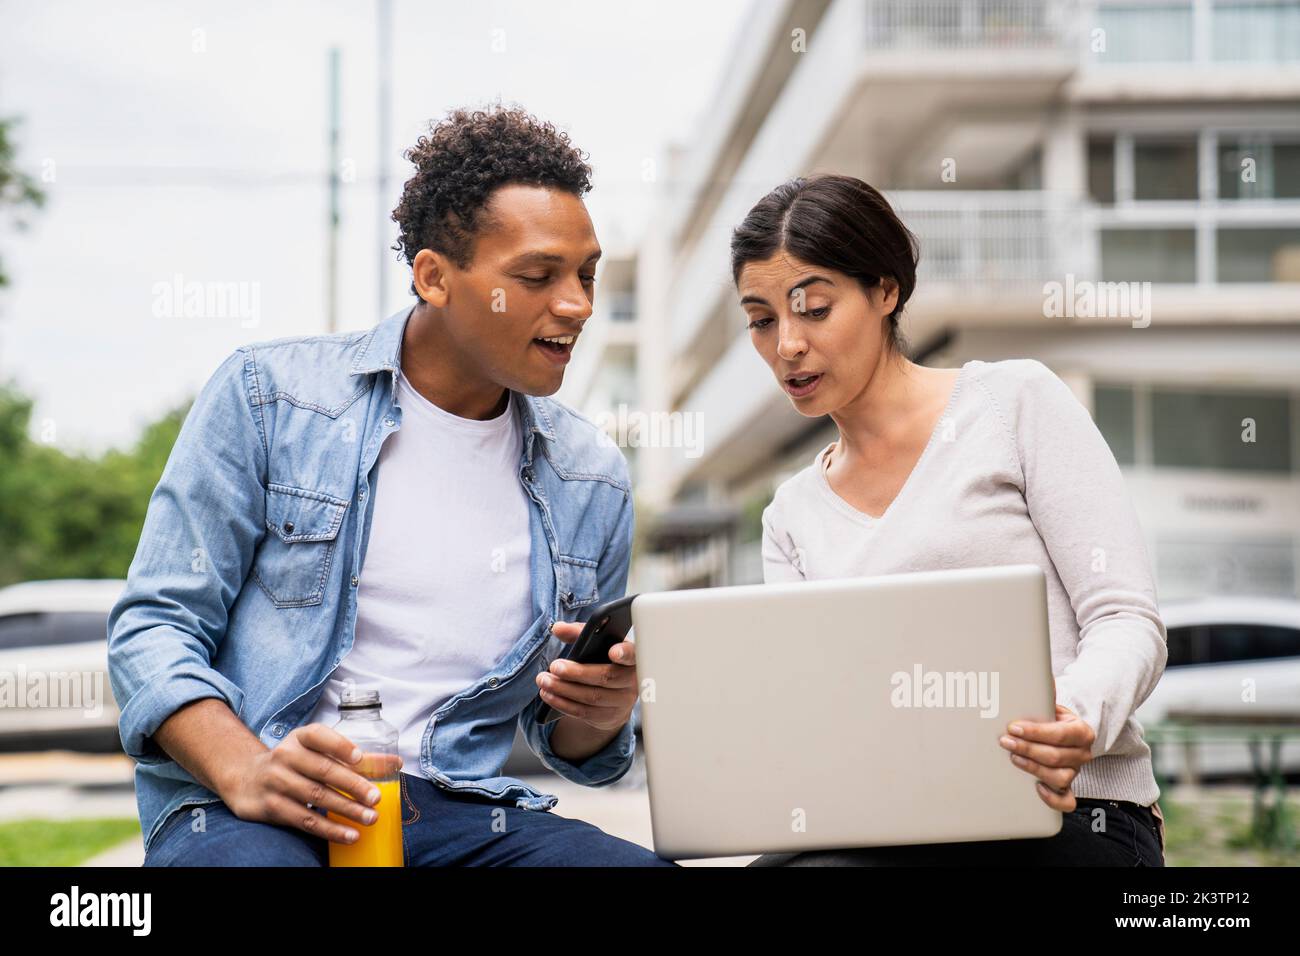 Mid-shot of African-American man and Latin American woman using laptop while working outdoors Stock Photo